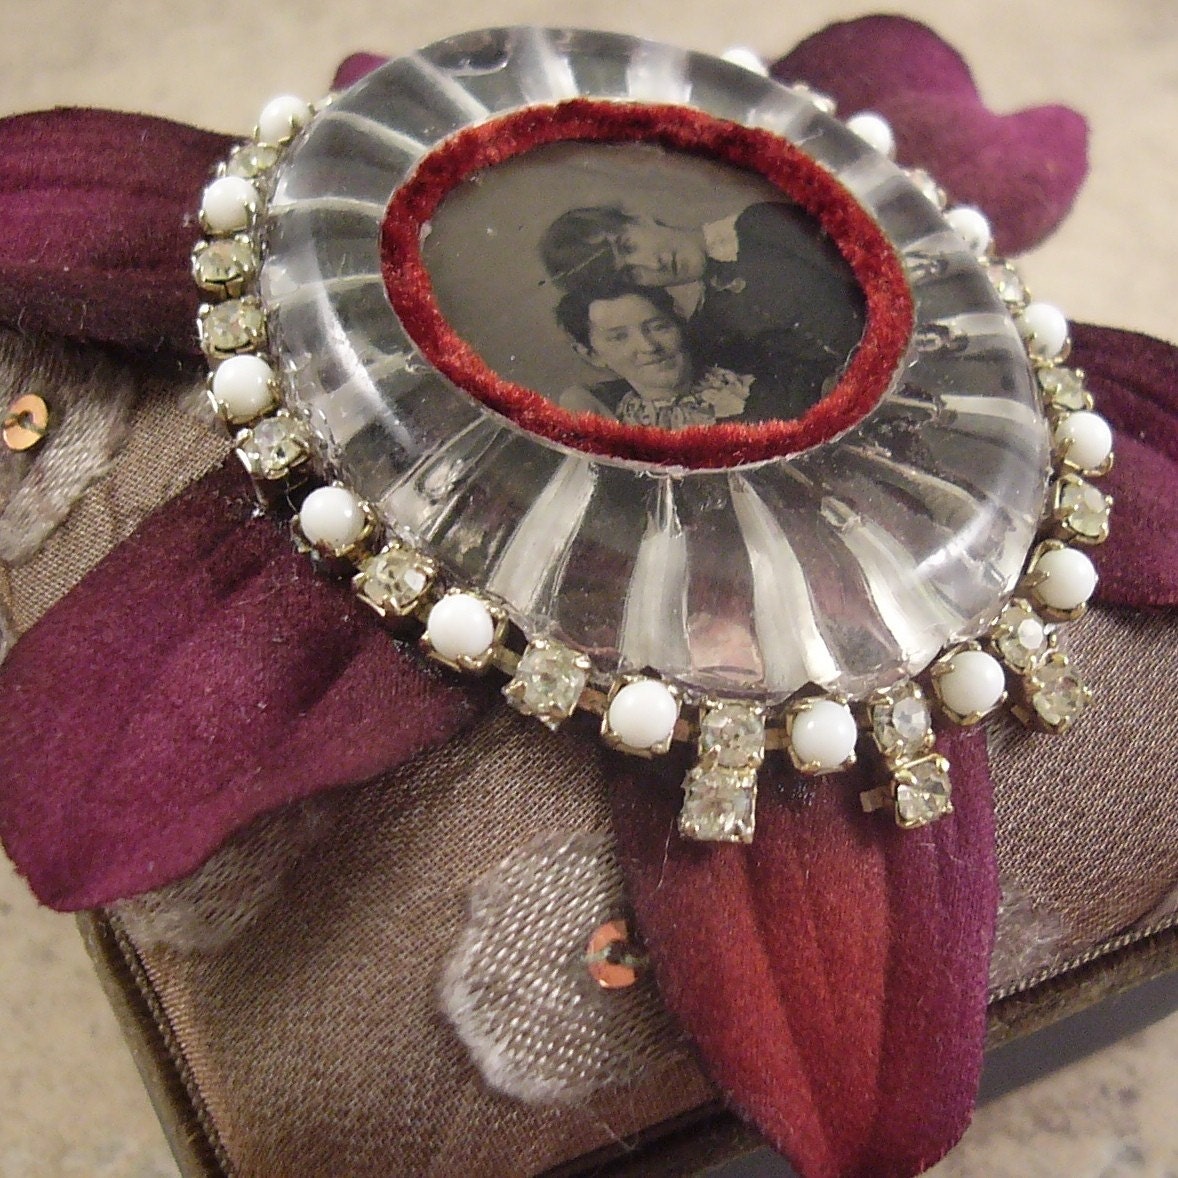 Ultra Special Sisters Tin Type Jewelry Treasure Box- Altered Art One of a Kind